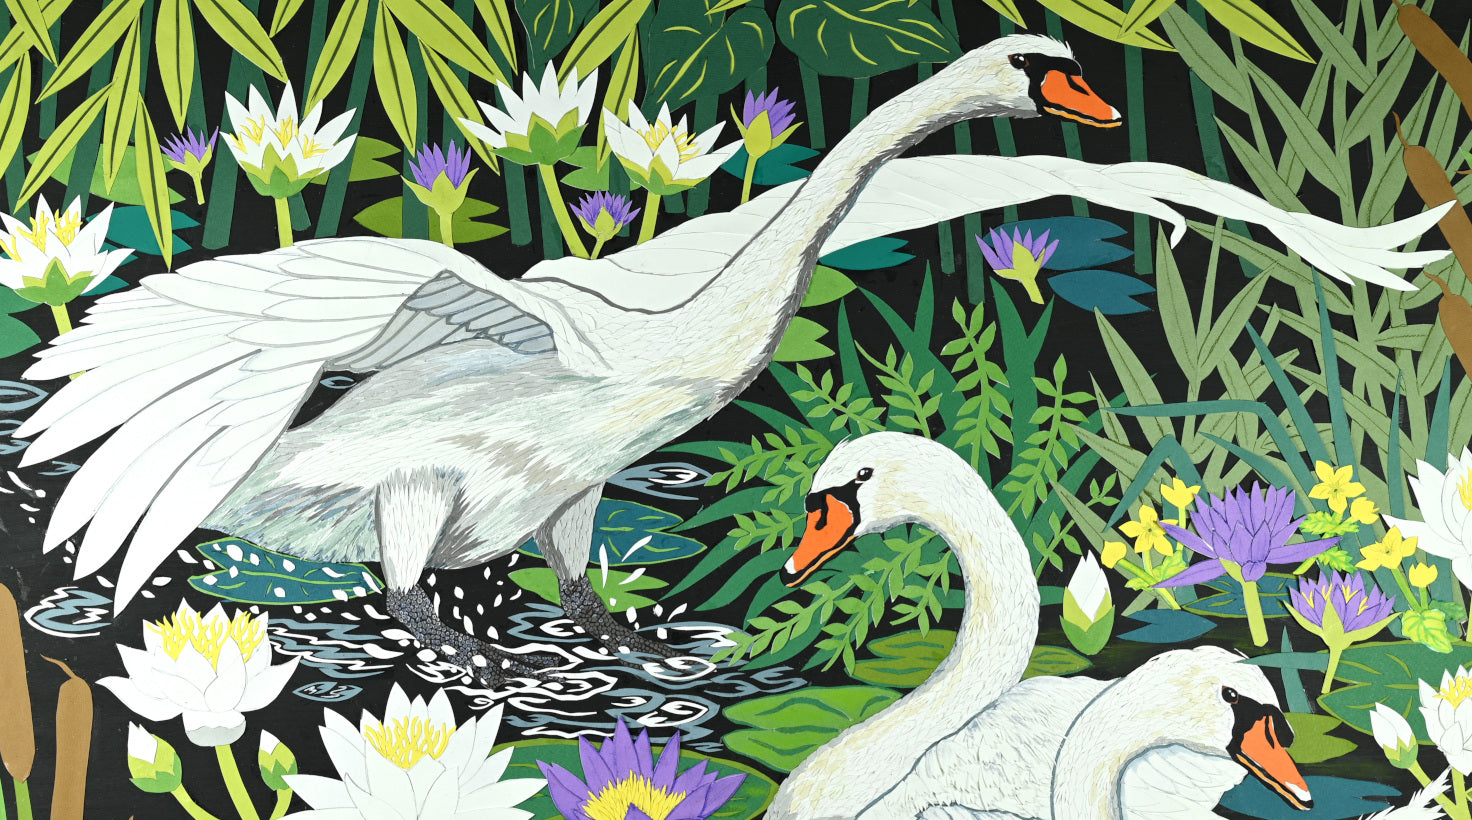 Gliding Swans by Fiona Scott-Wilson from the Water Lilies Exhibition